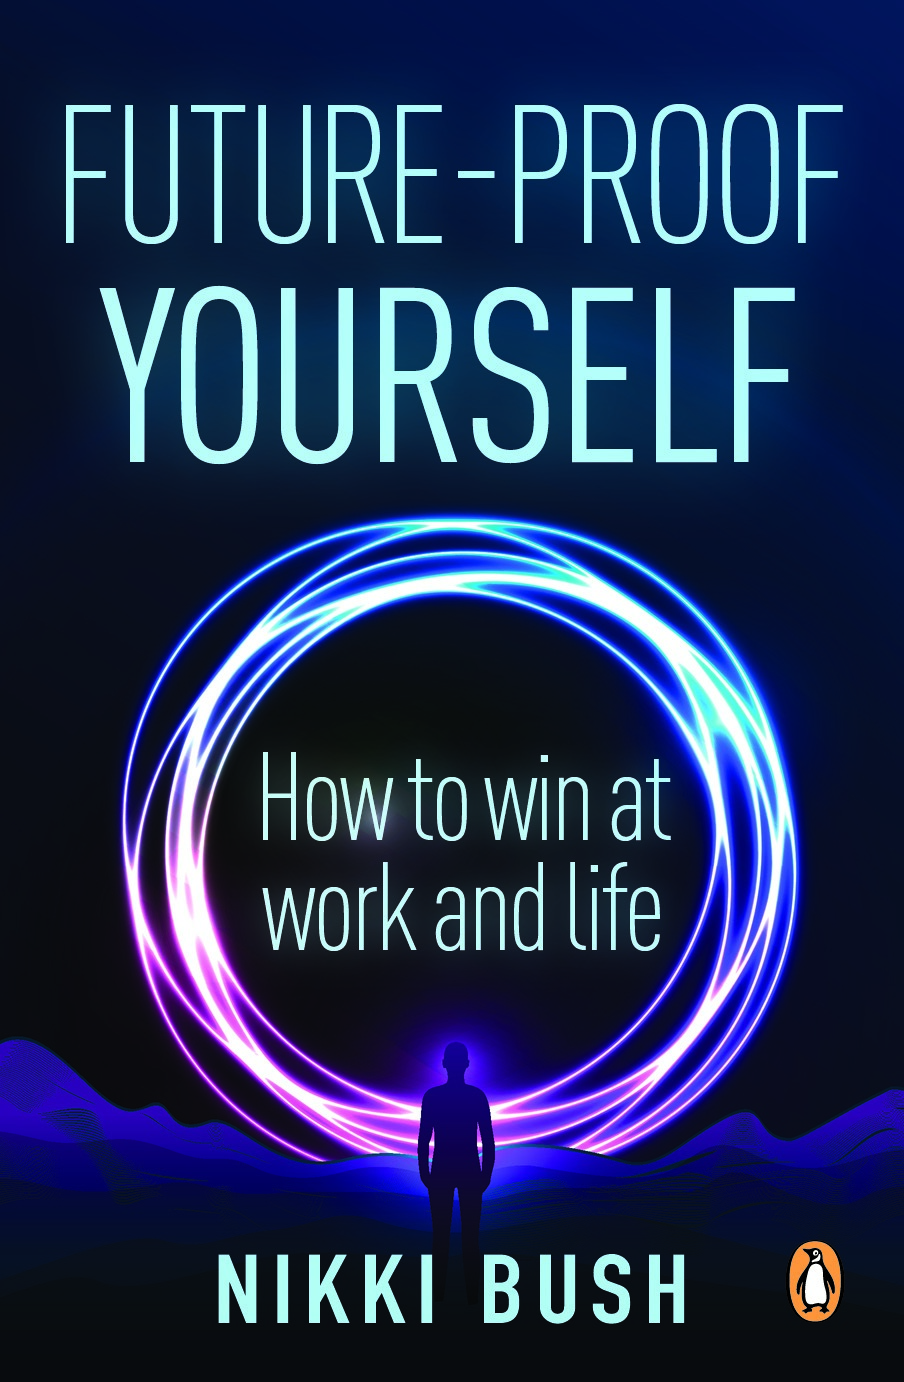 Cover of 'Future-proof yourself' (Supplied)